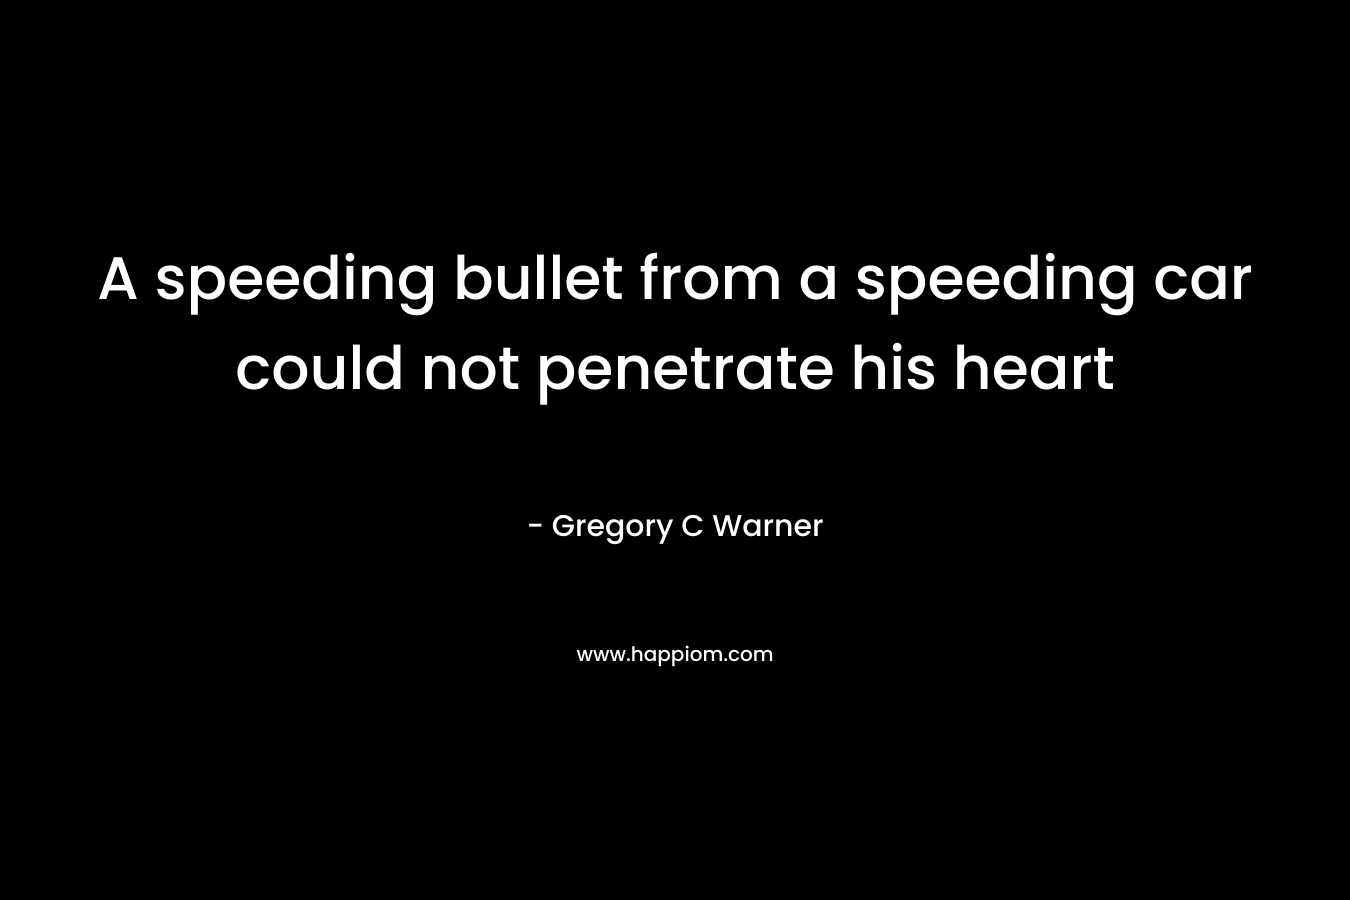 A speeding bullet from a speeding car could not penetrate his heart